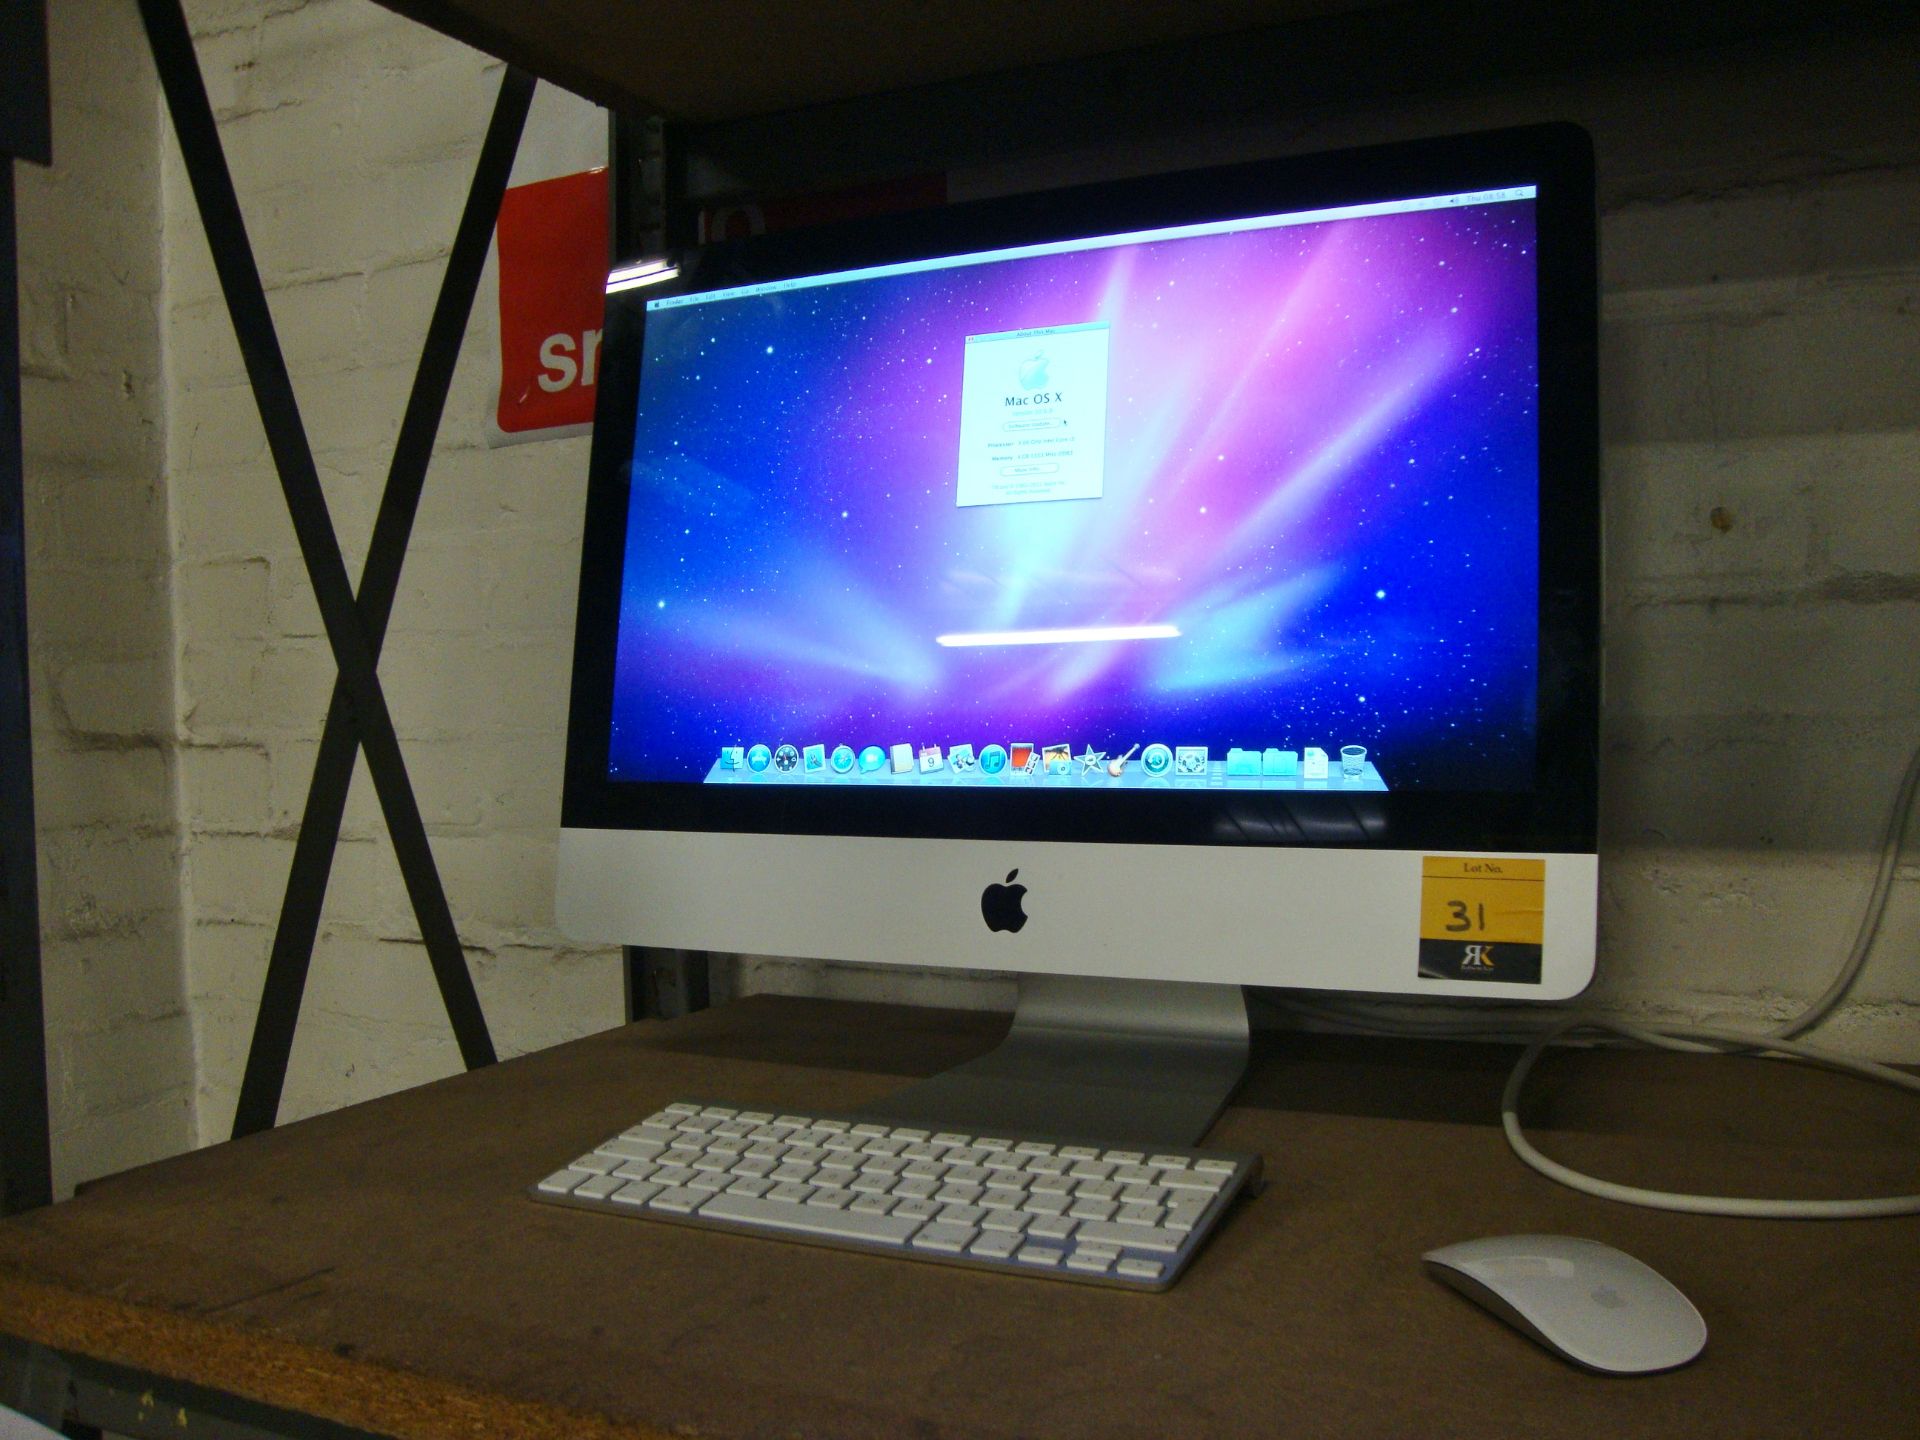 Apple iMac Intel Core i3 @ 3.06GHz, 4Gb RAM, 500Gb hard drive all-in-one computer model A1311 - Image 4 of 11